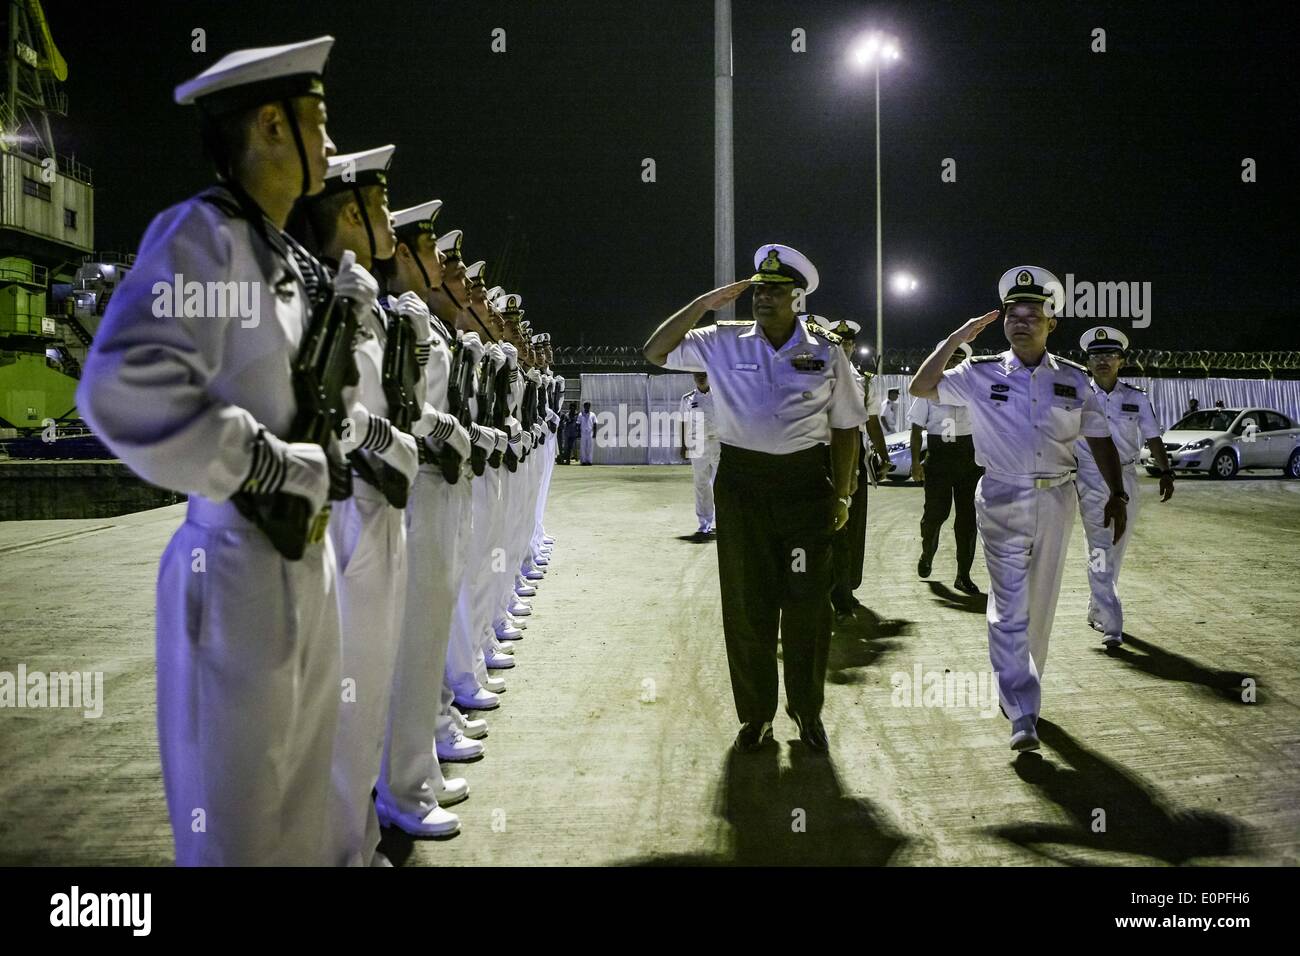 Visakhapatnam. 18th May, 2014. Flag Officer Commanding-in-Chief of Indian Eastern Naval Command Anil Chopra (2nd R front) reviews an honor guard with Command of China's missile frigate Weifang Han Xiaohu (1st R front) during a reception for Chinese Navy training vessel Zhenghe and missile frigate Weifang at port of Visakhapatnam in east Indian on May 18, 2014. Chinese Navy training vessel Zhenghe and missile frigate Weifang arrived in port of Visakhapatnam in east Indian and started a 4-day visit on Saturday, May 17. Credit:  Zheng Huansong/Xinhua/Alamy Live News Stock Photo